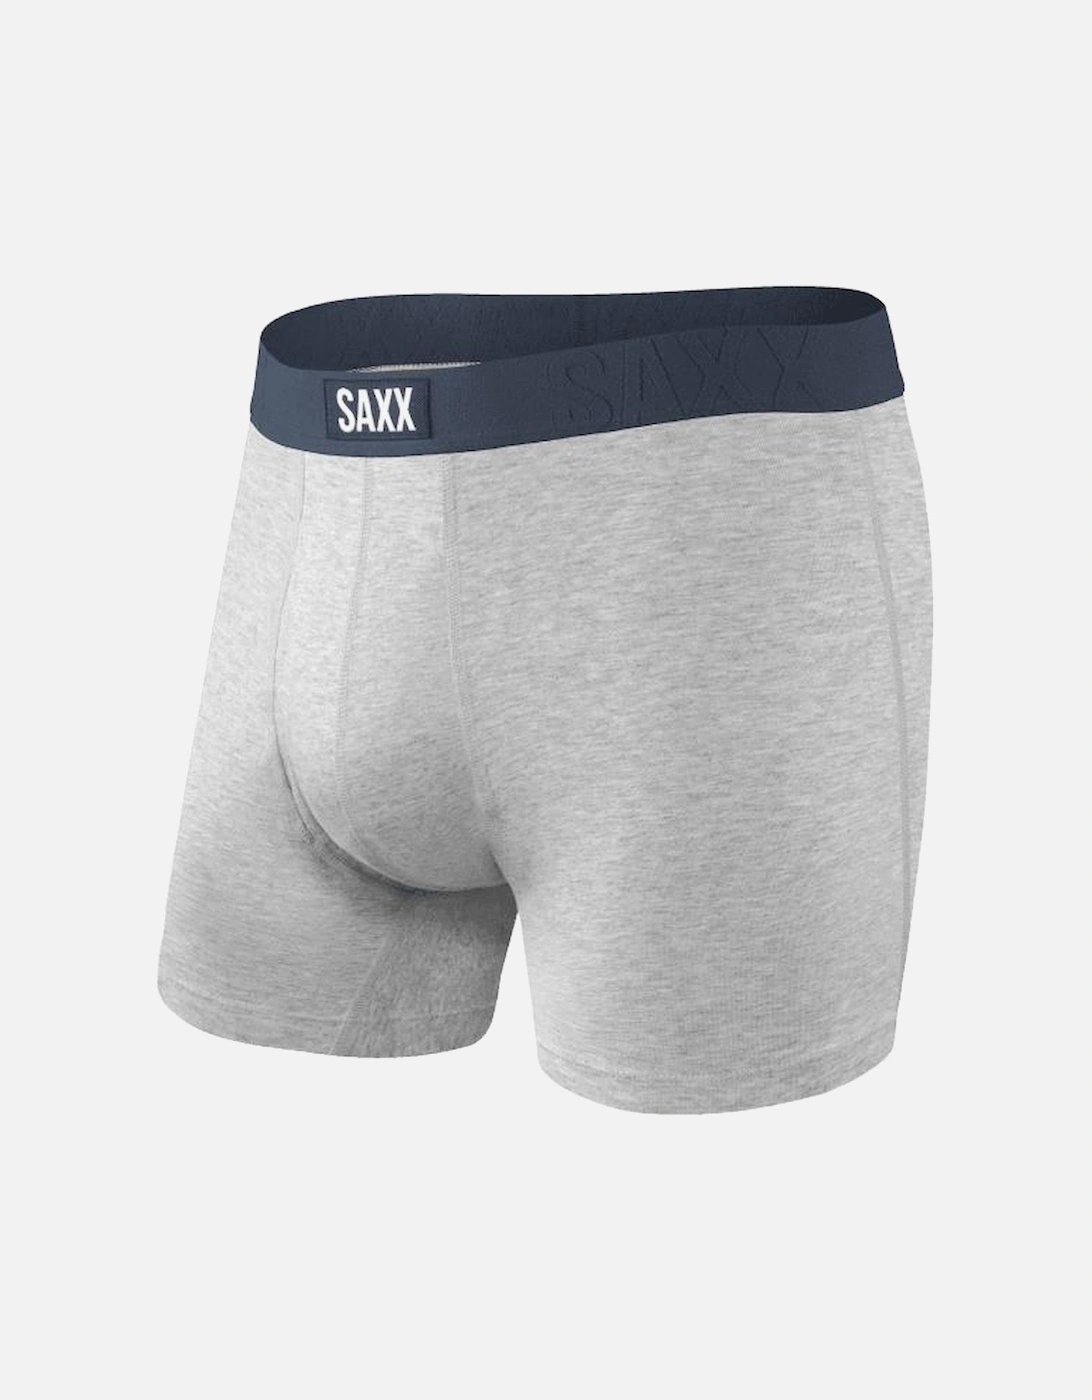 Undercover Fly Boxer Brief, Grey Heather, 7 of 6